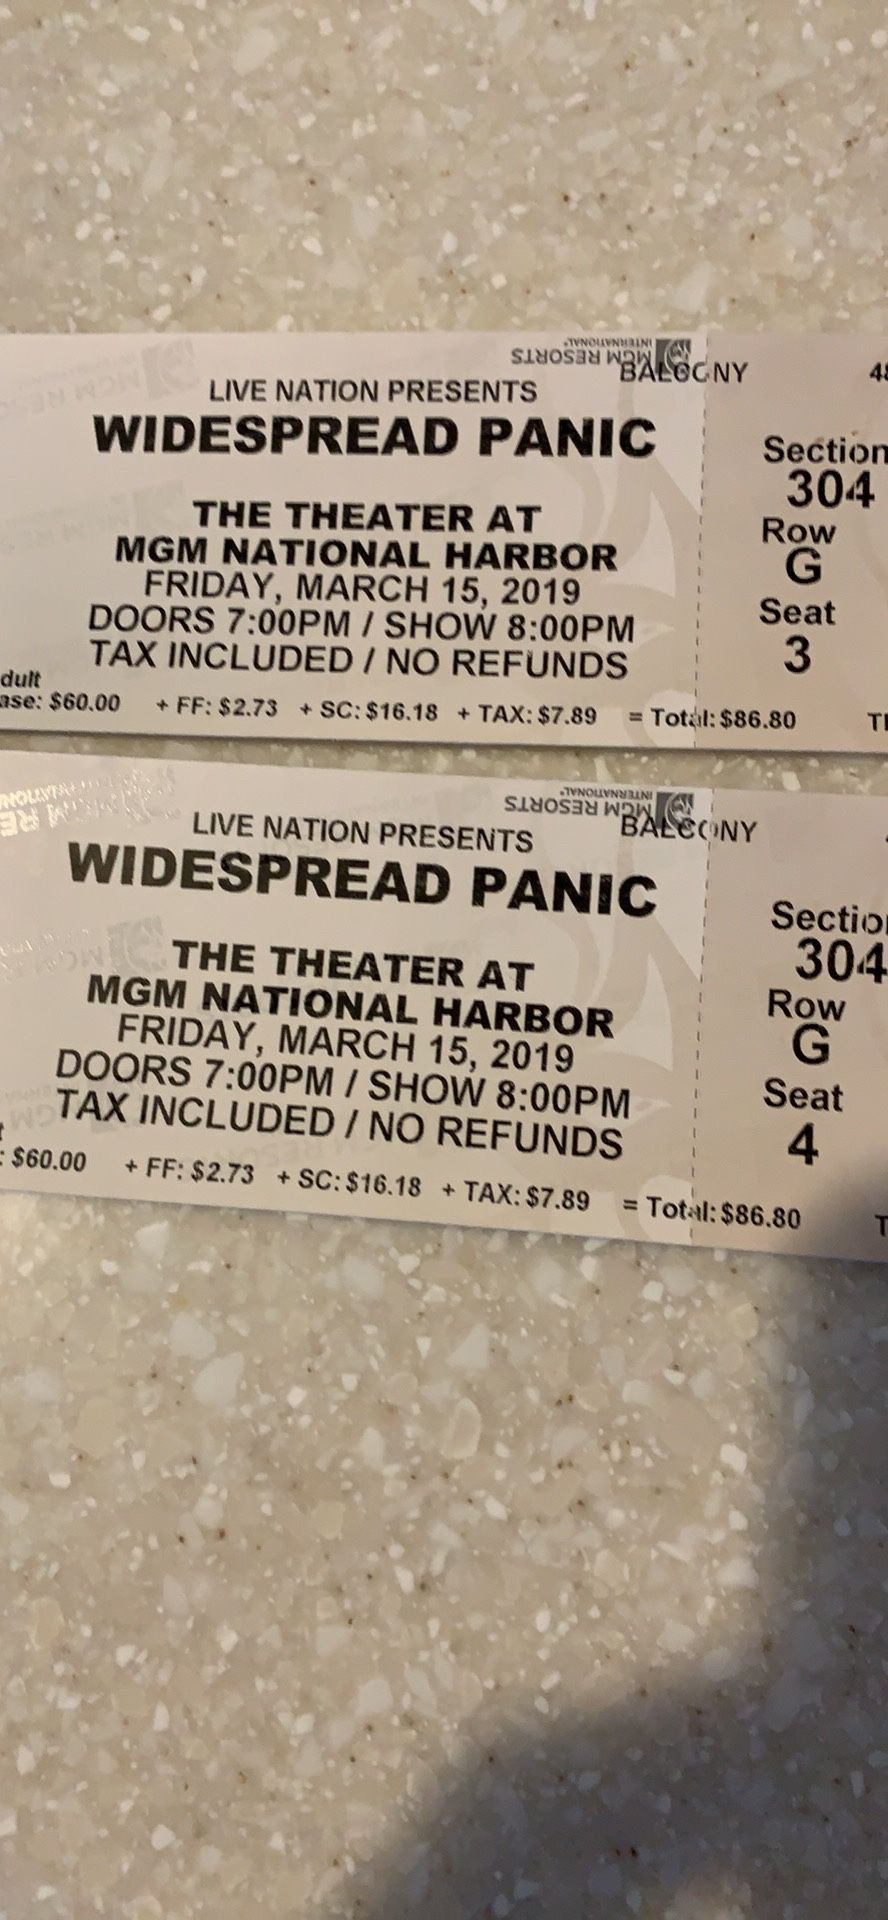 Widespread Panic Tickets tonight at MGM